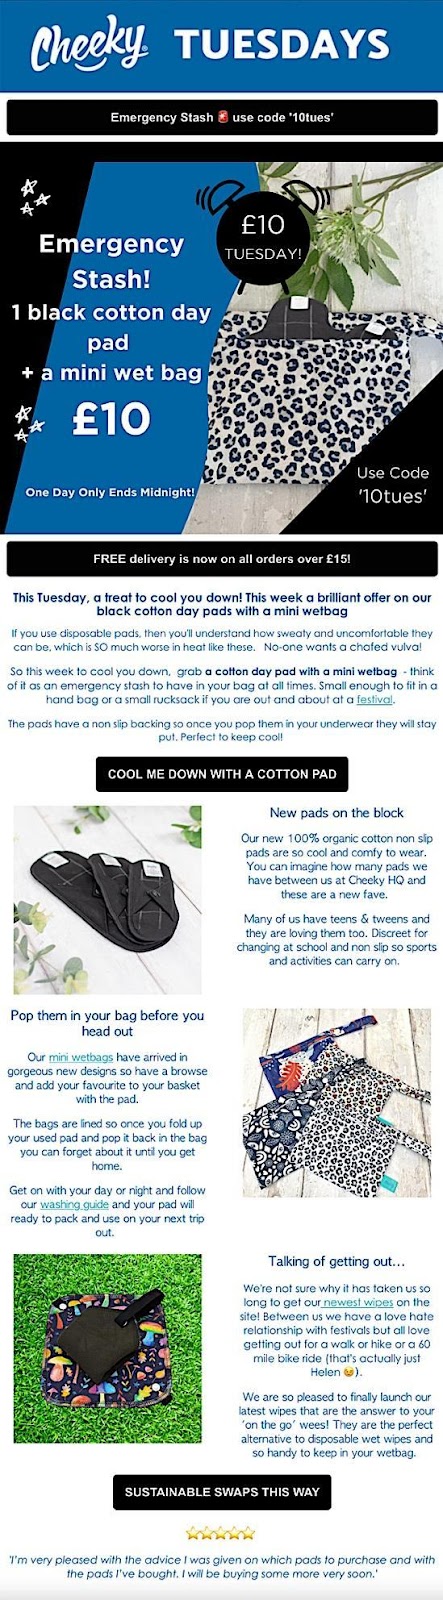 cheeky wipes email copywriting sample